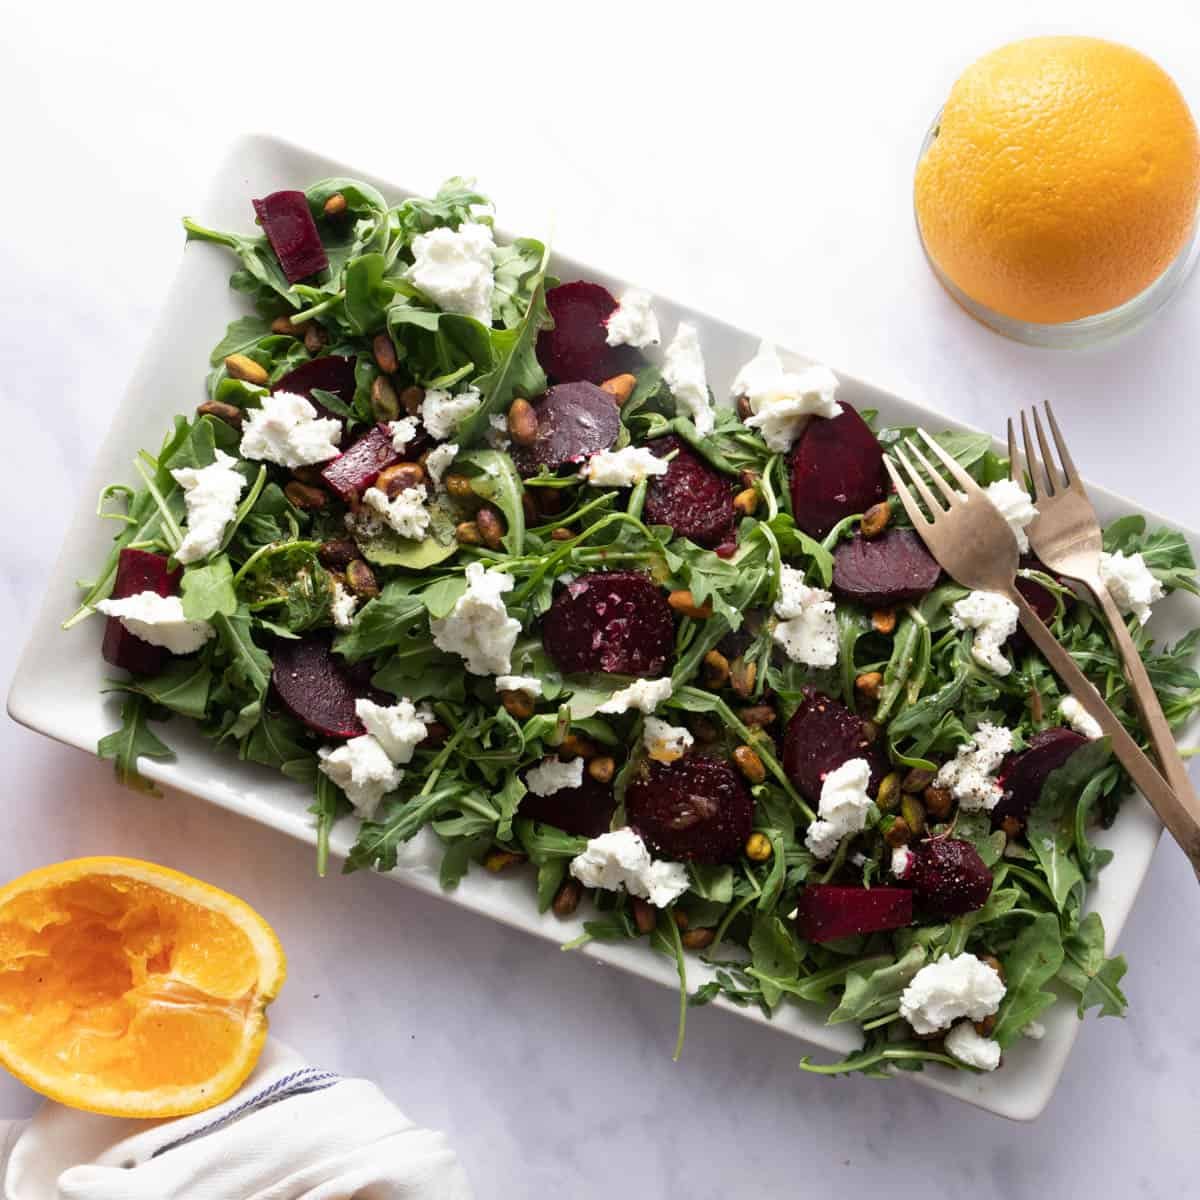 Roasted Beet Salad with Goat Cheese with Goat Cheese & Citrus Vinaigrette